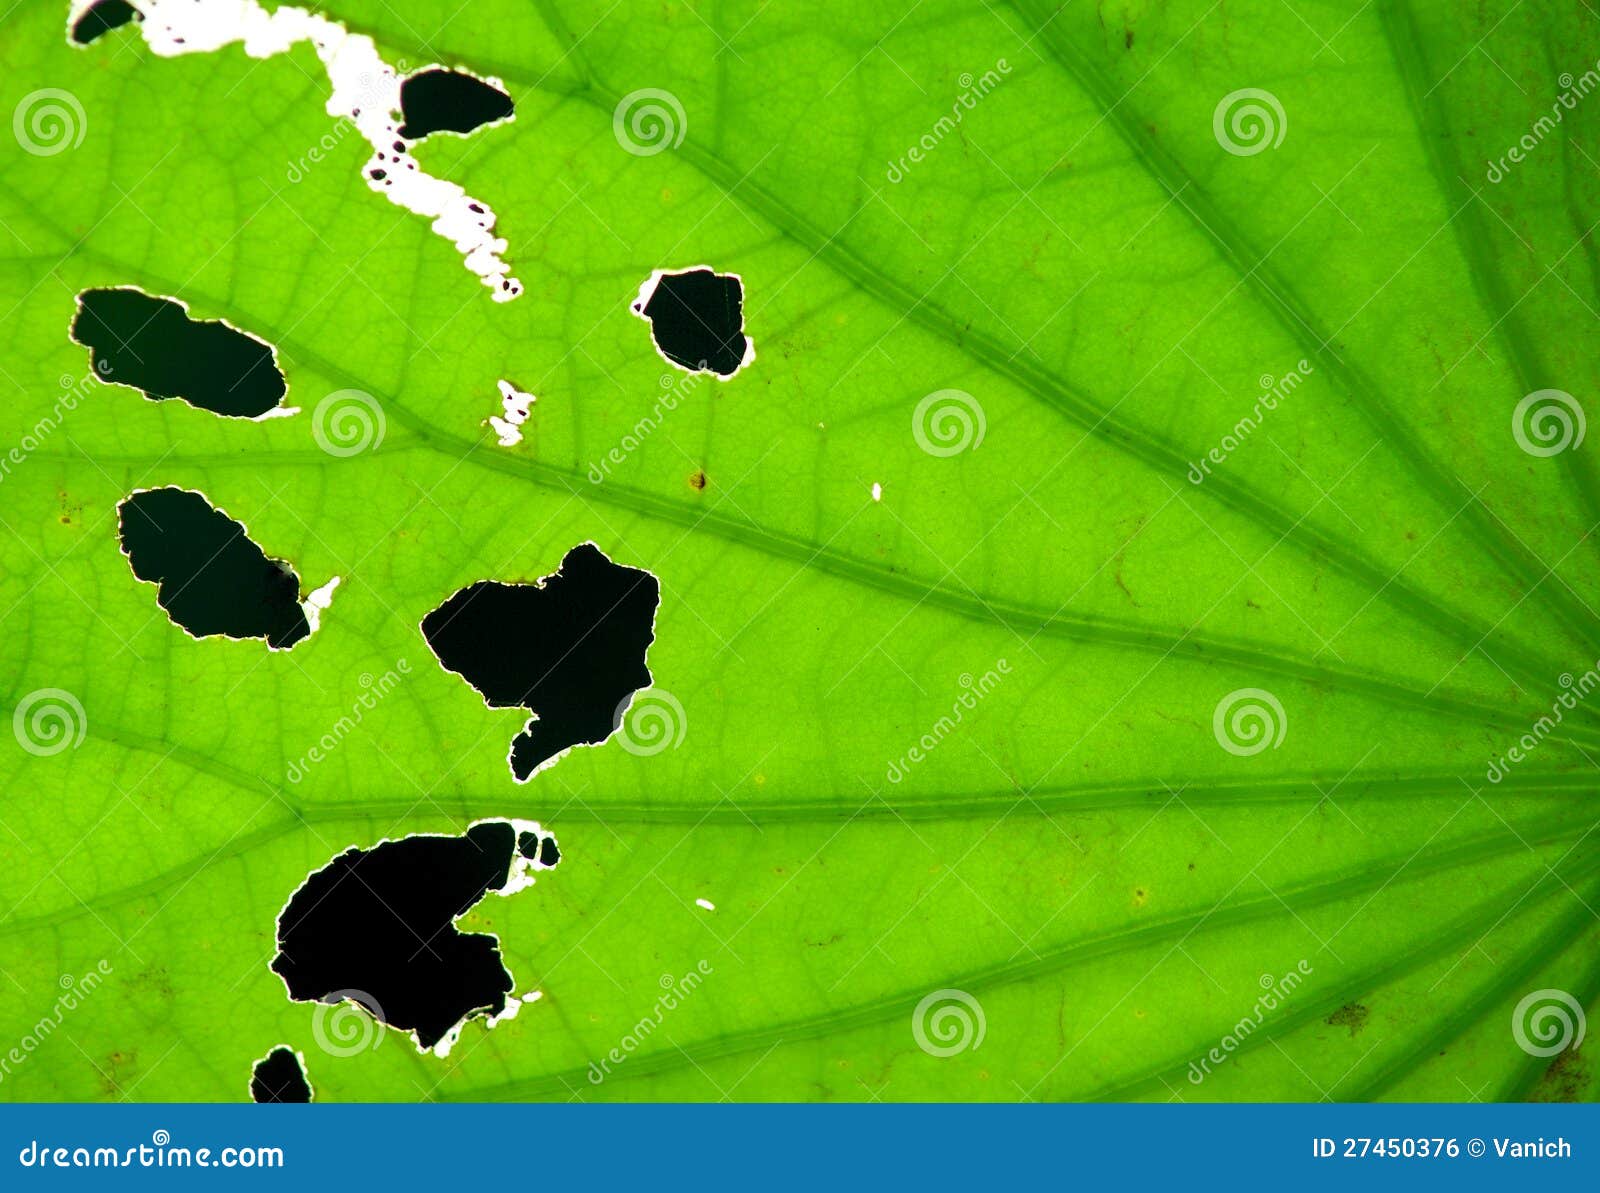 Close up of leaves stock photo. Image of outdoor, leaf - 27450376